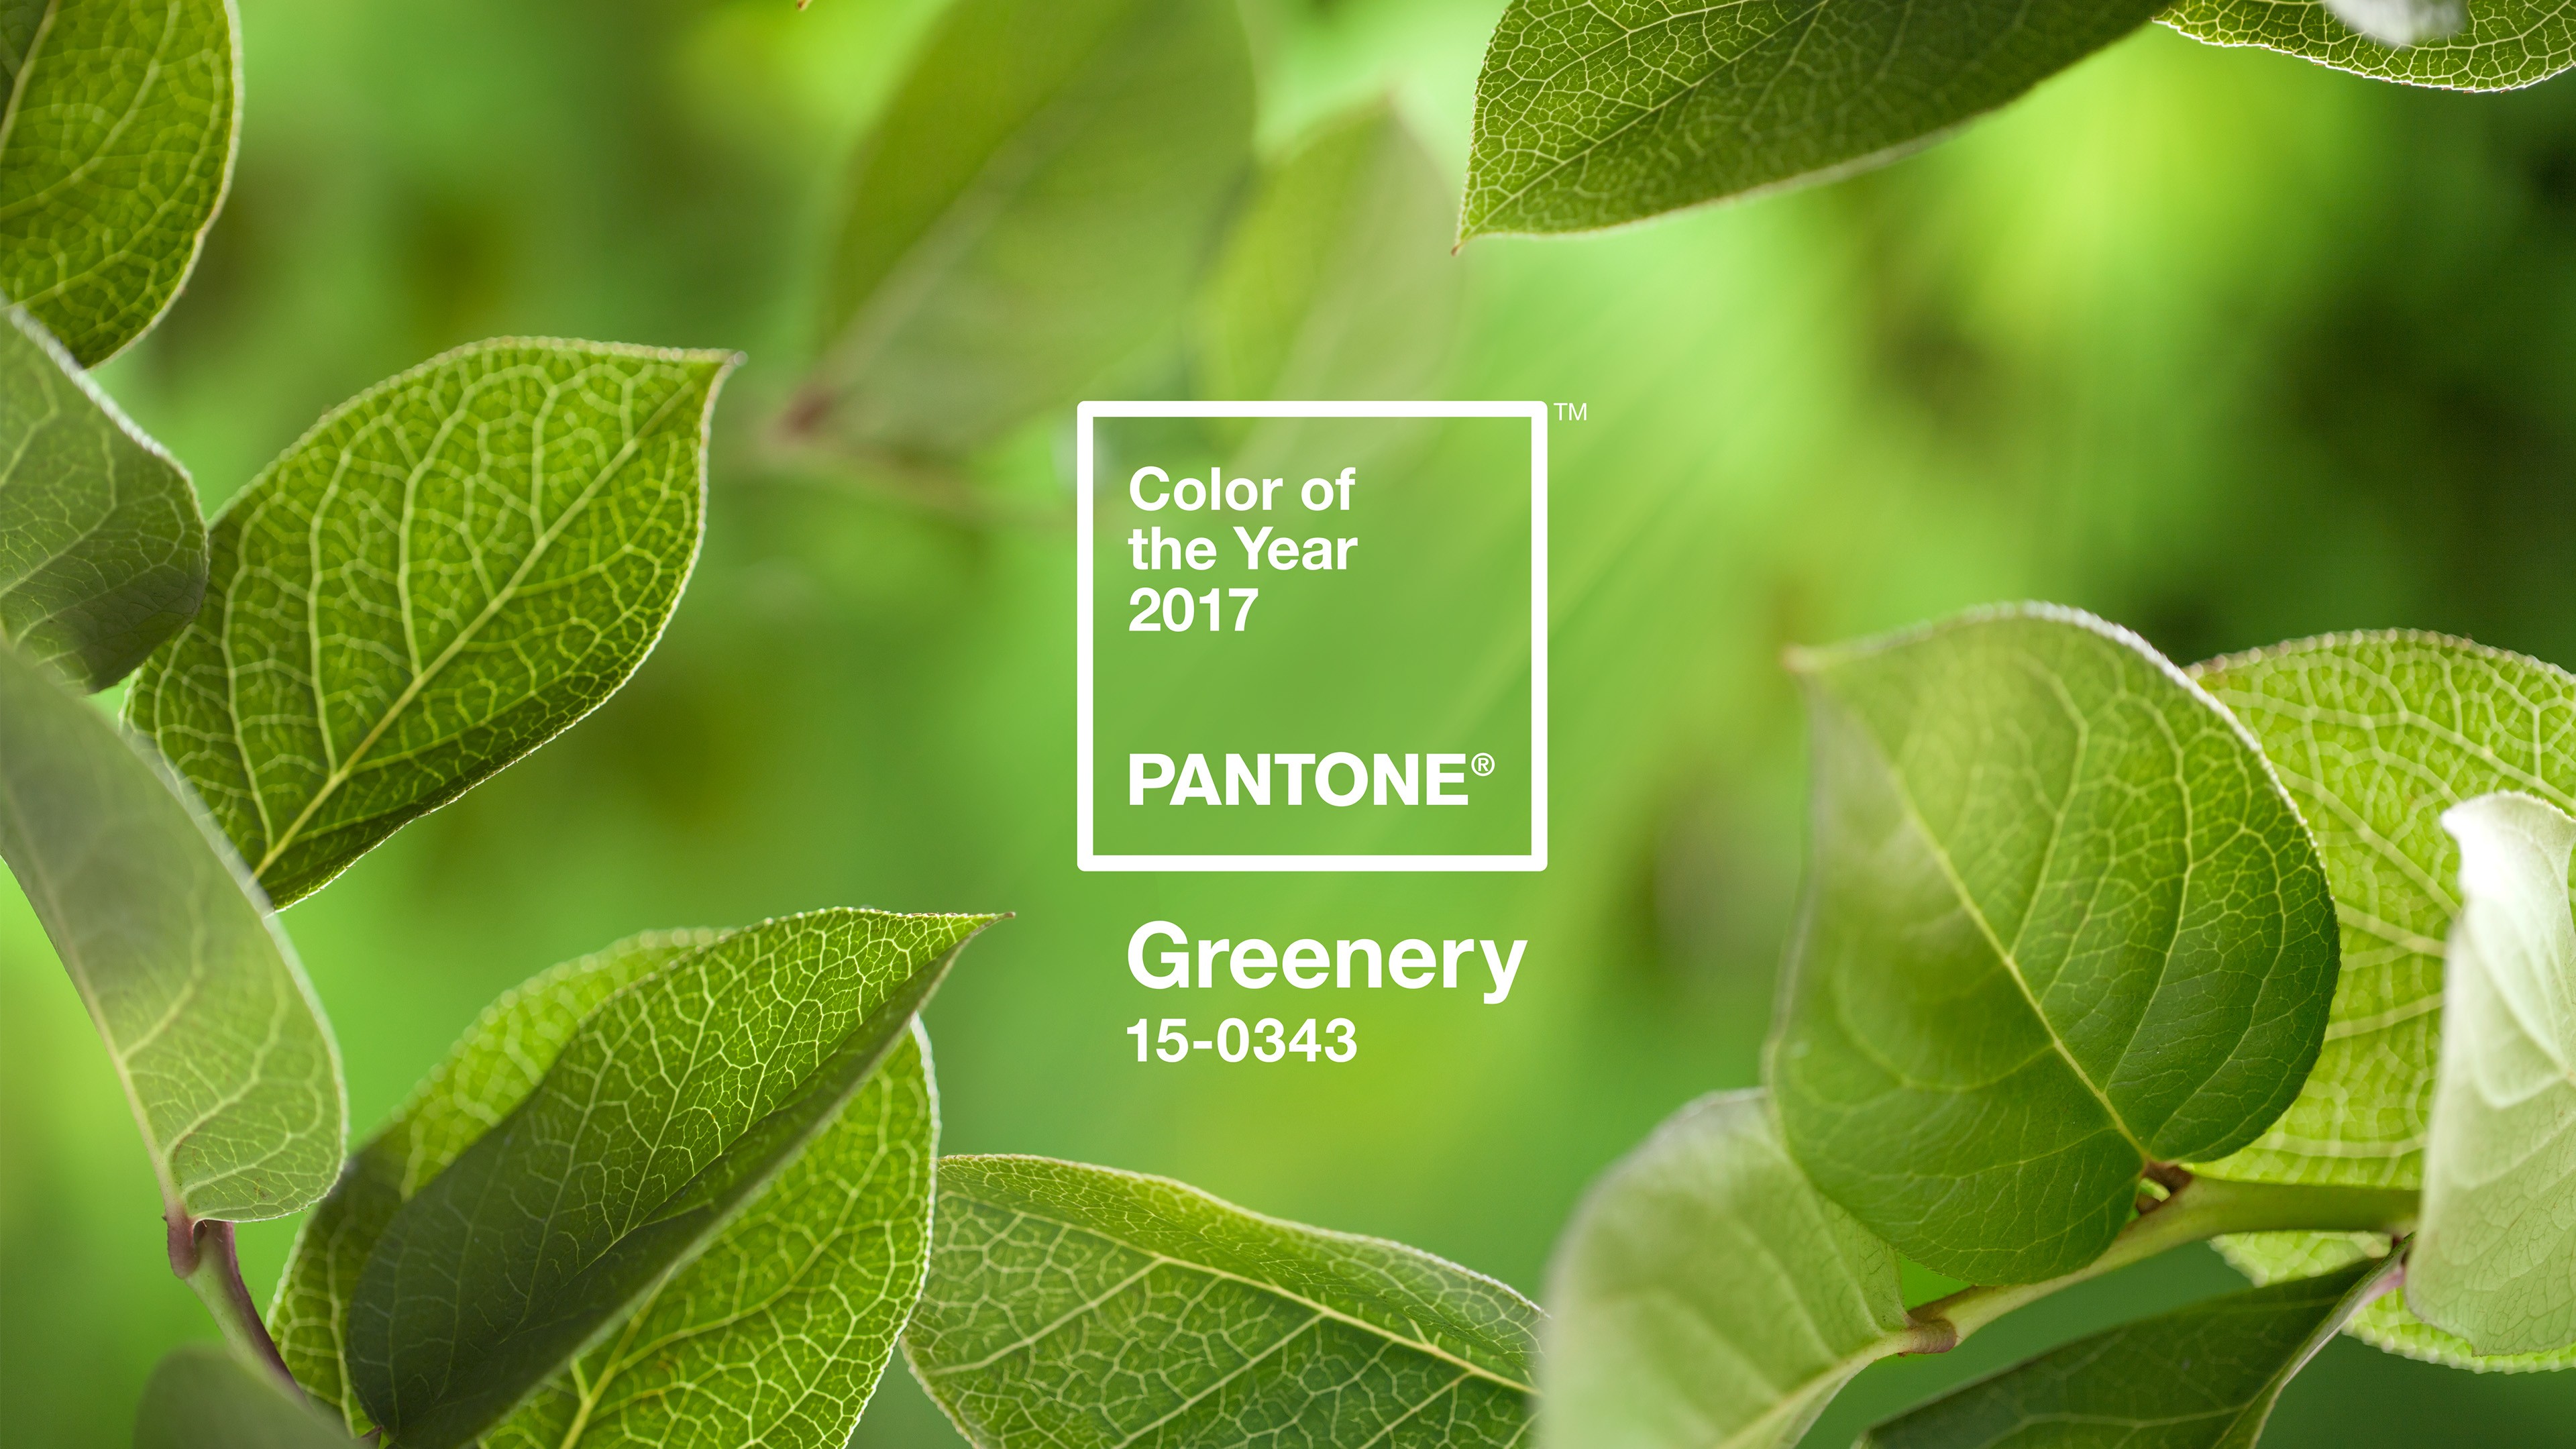 General 3840x2160 color codes green landscape colorful logo leaves trees minimalism digital art photo manipulation closeup text 2017 (Year)